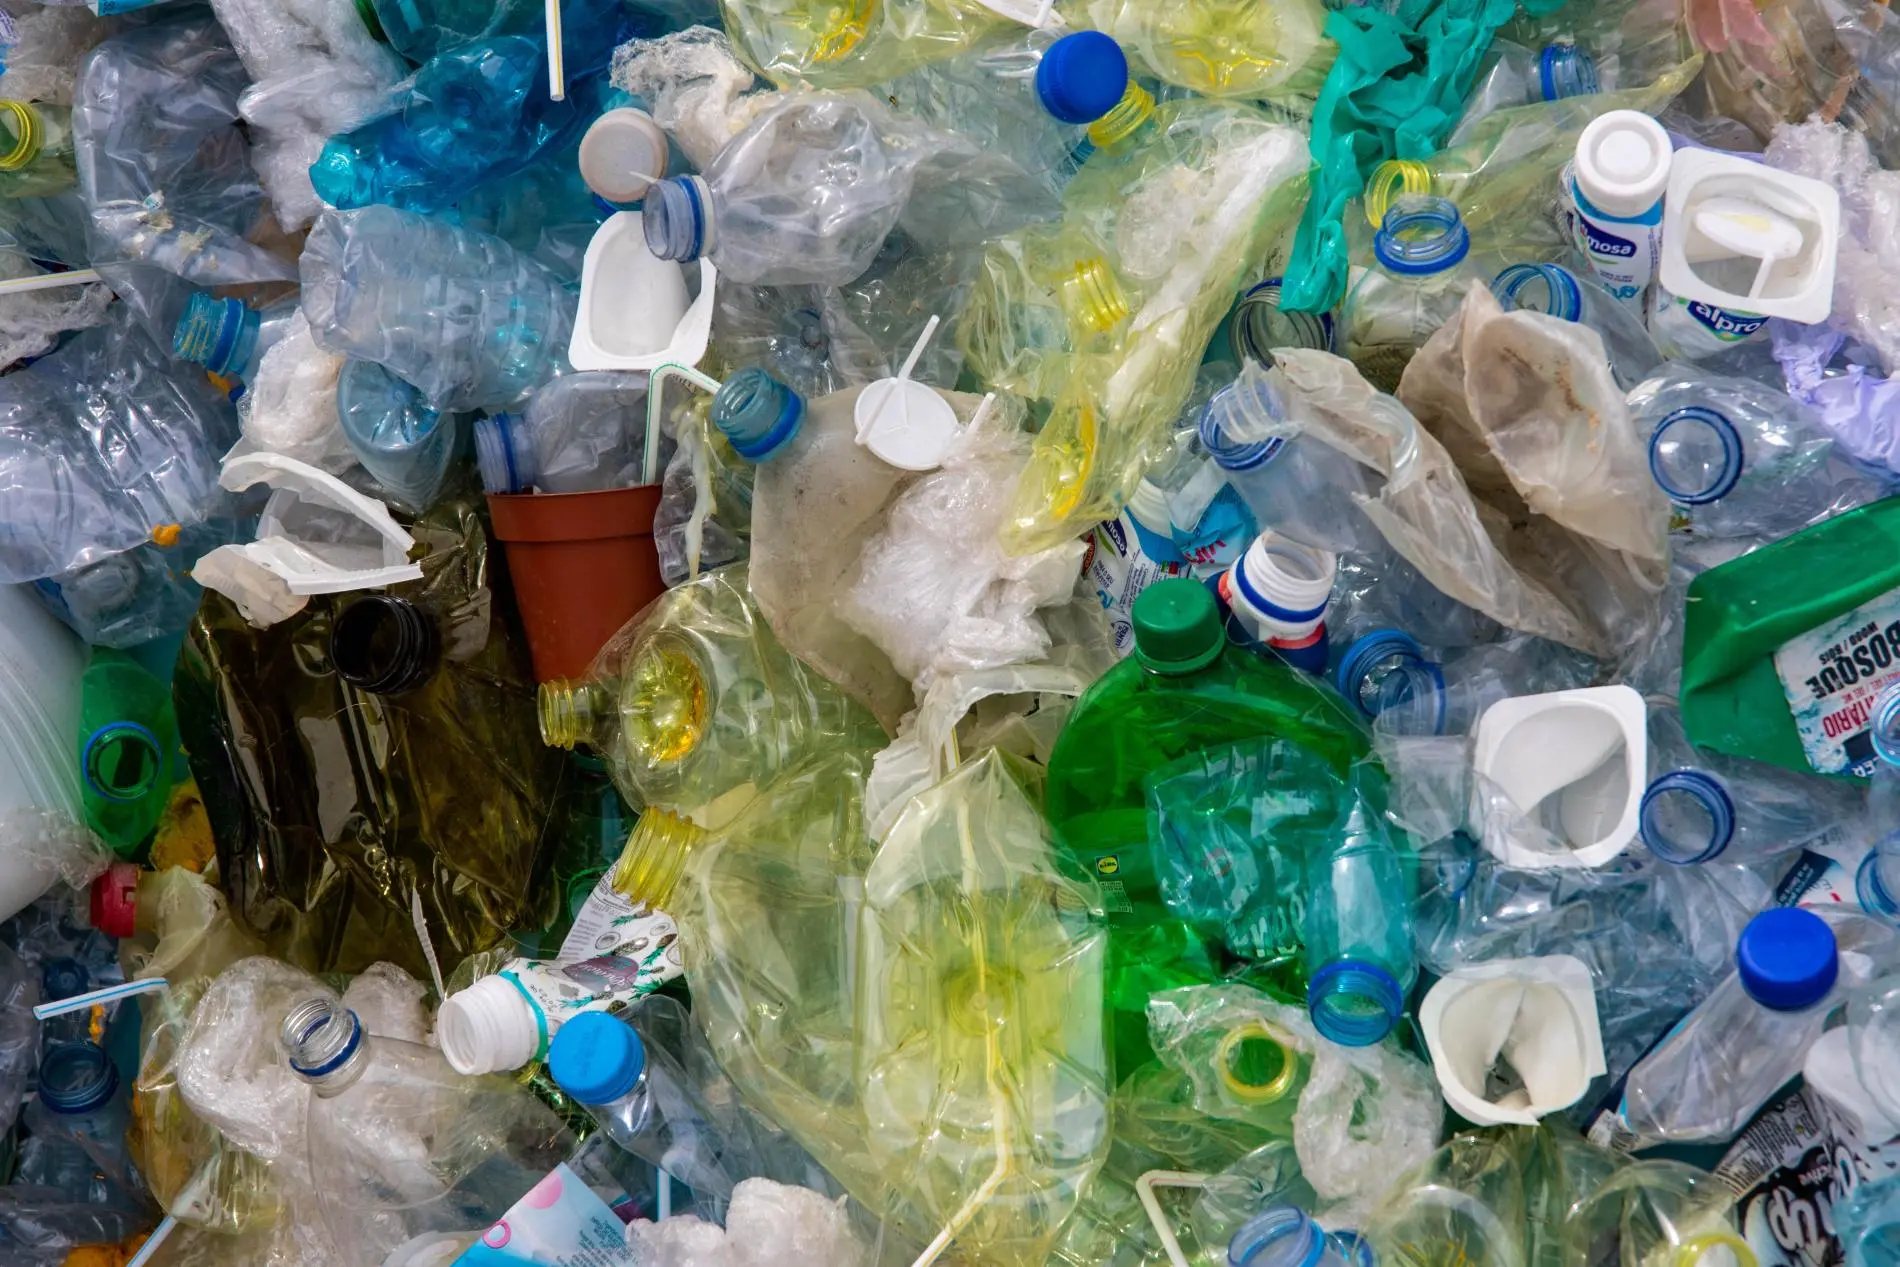 Canada's single-use plastics ban starts this week. Here's what it includes